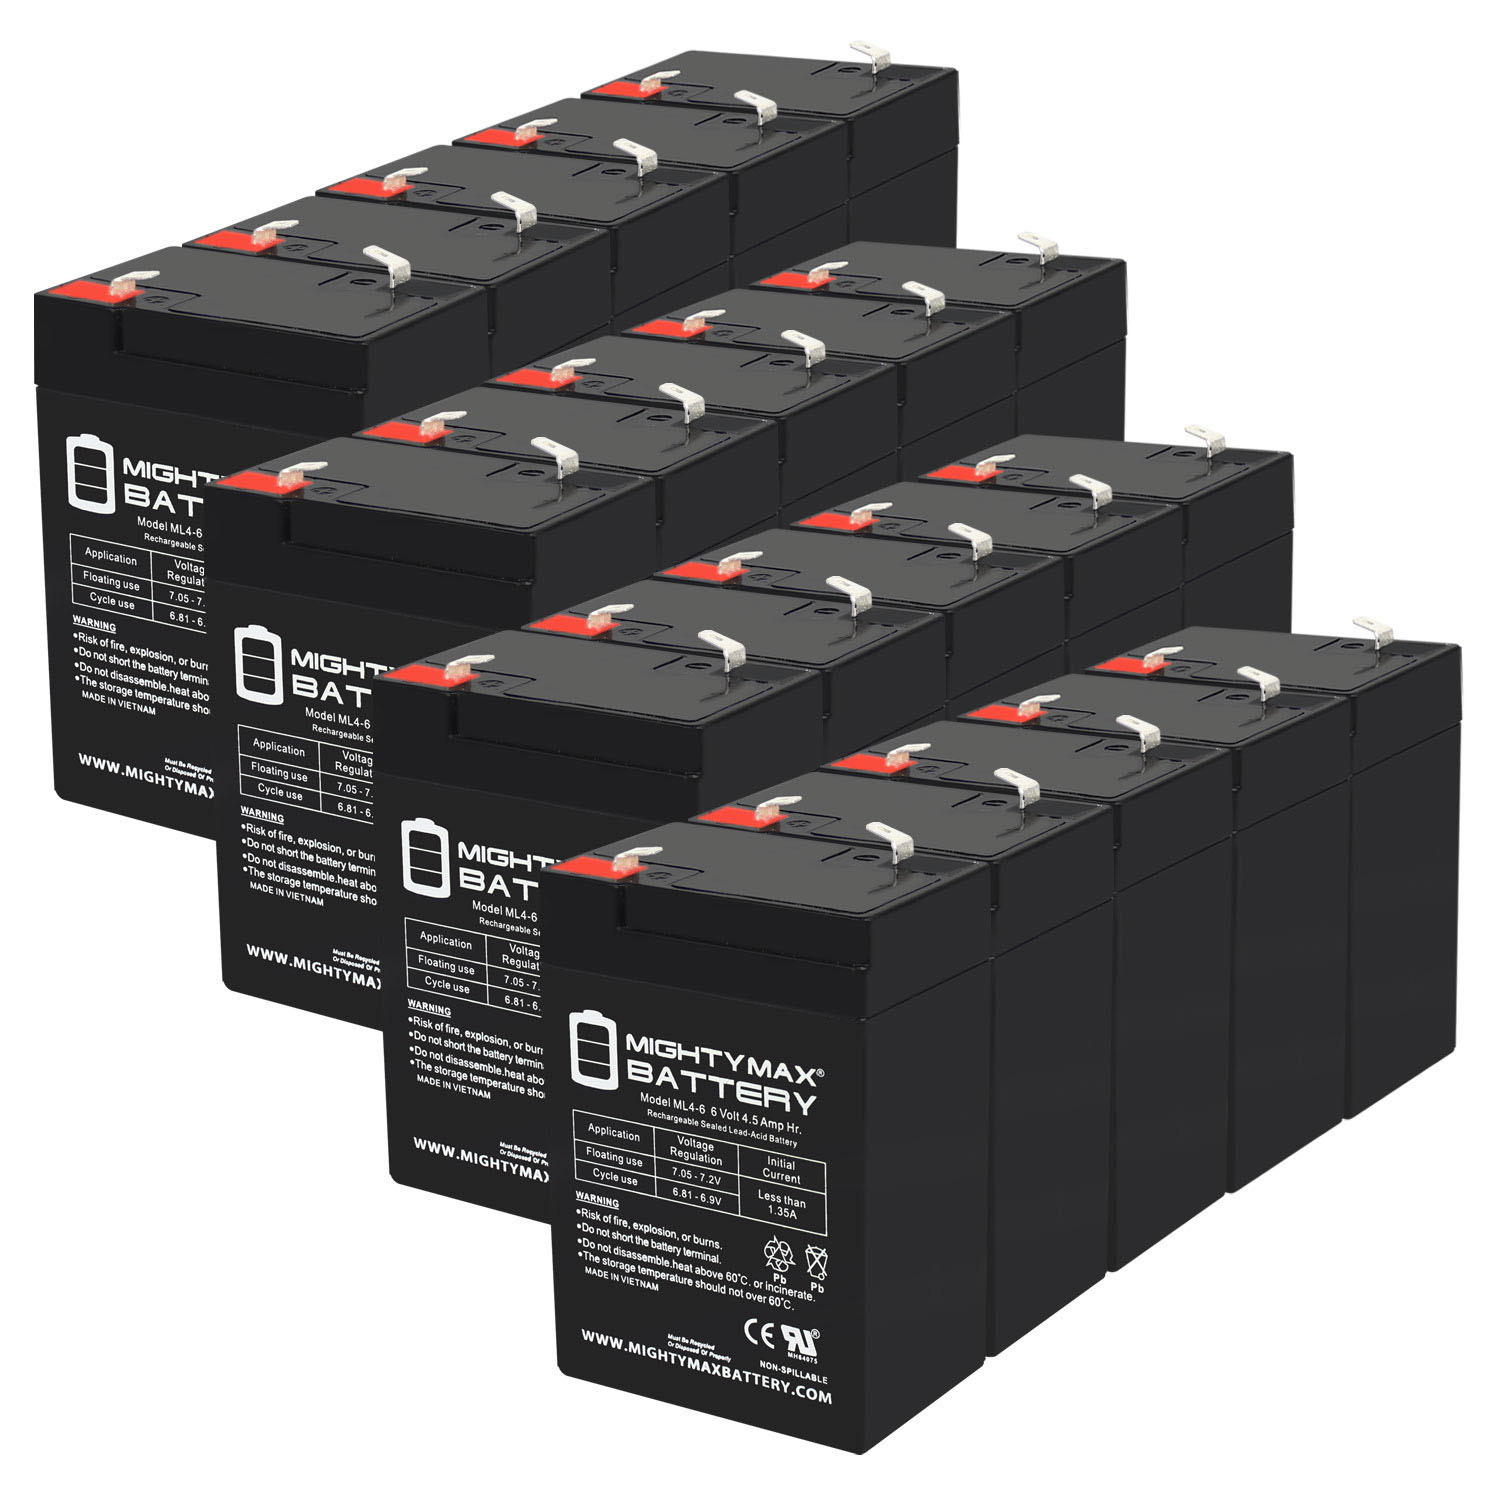 6V 4.5AH SLA Replacement Battery for Dual-Lite HCXUGW - 20 Pack